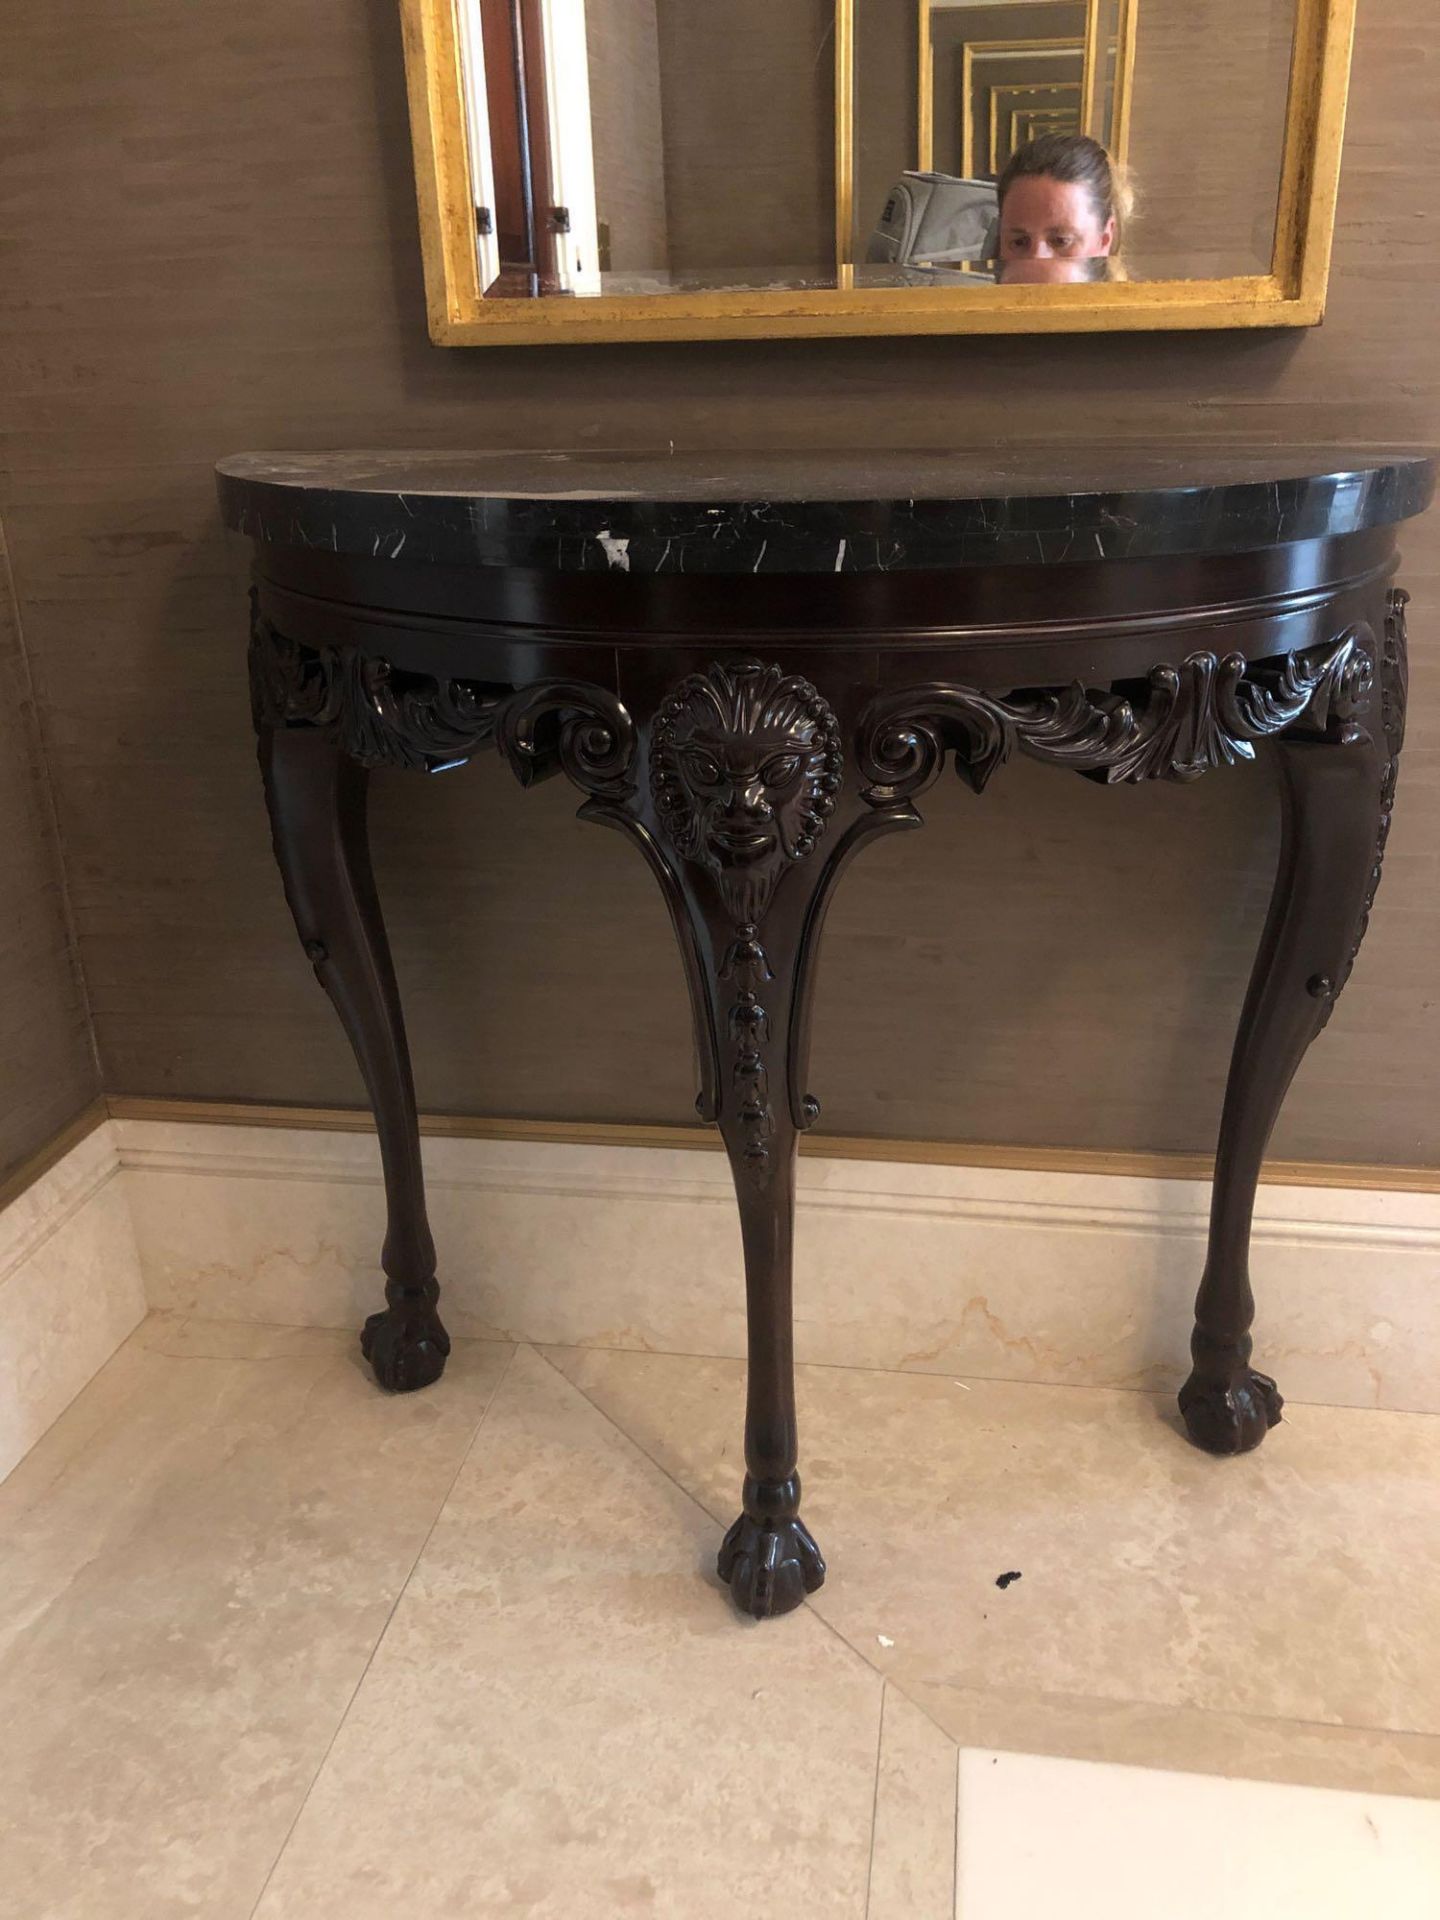 Demi Lune Console Table Wooden Table With Carved Details And Black Marble Top 85 x 39 x 78cm (Room - Image 2 of 2